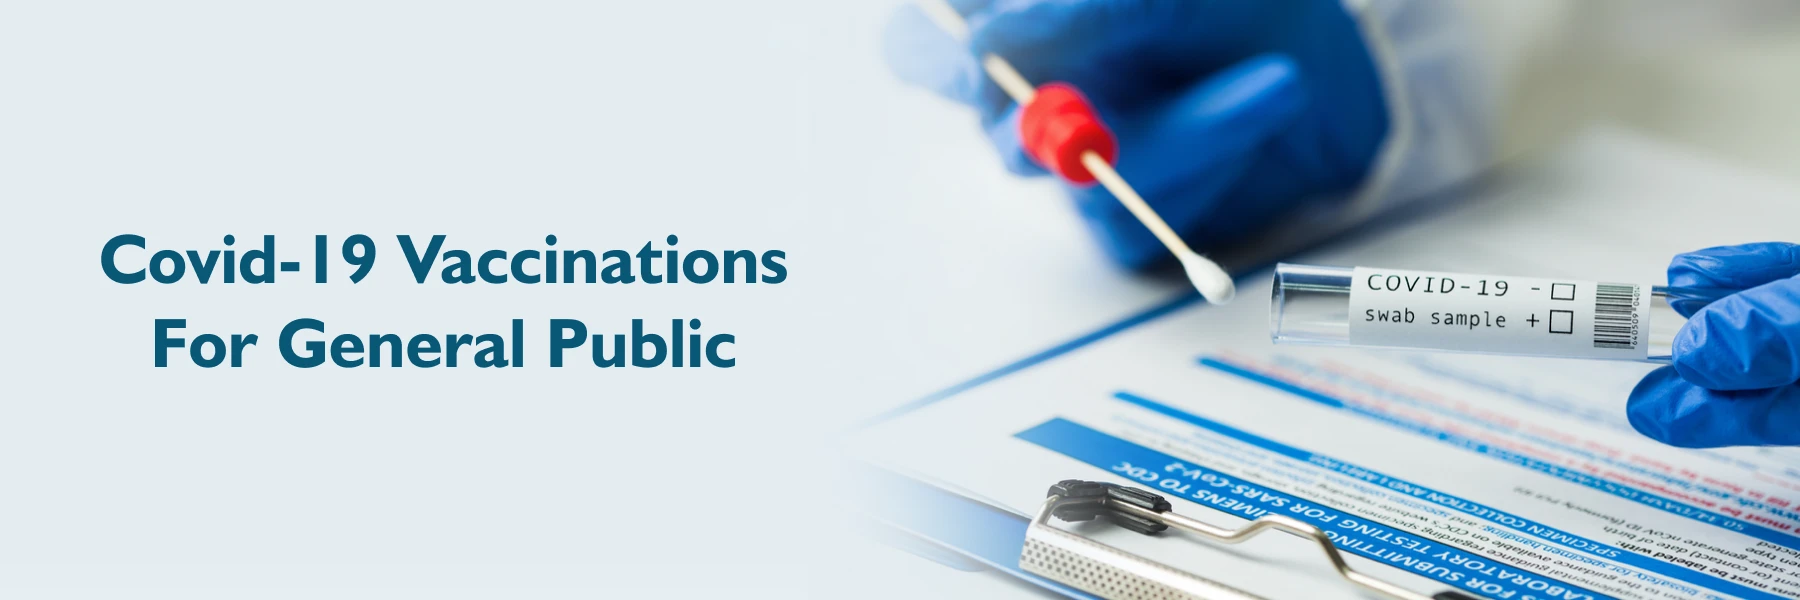 Covid-19 Vaccinations For General Public